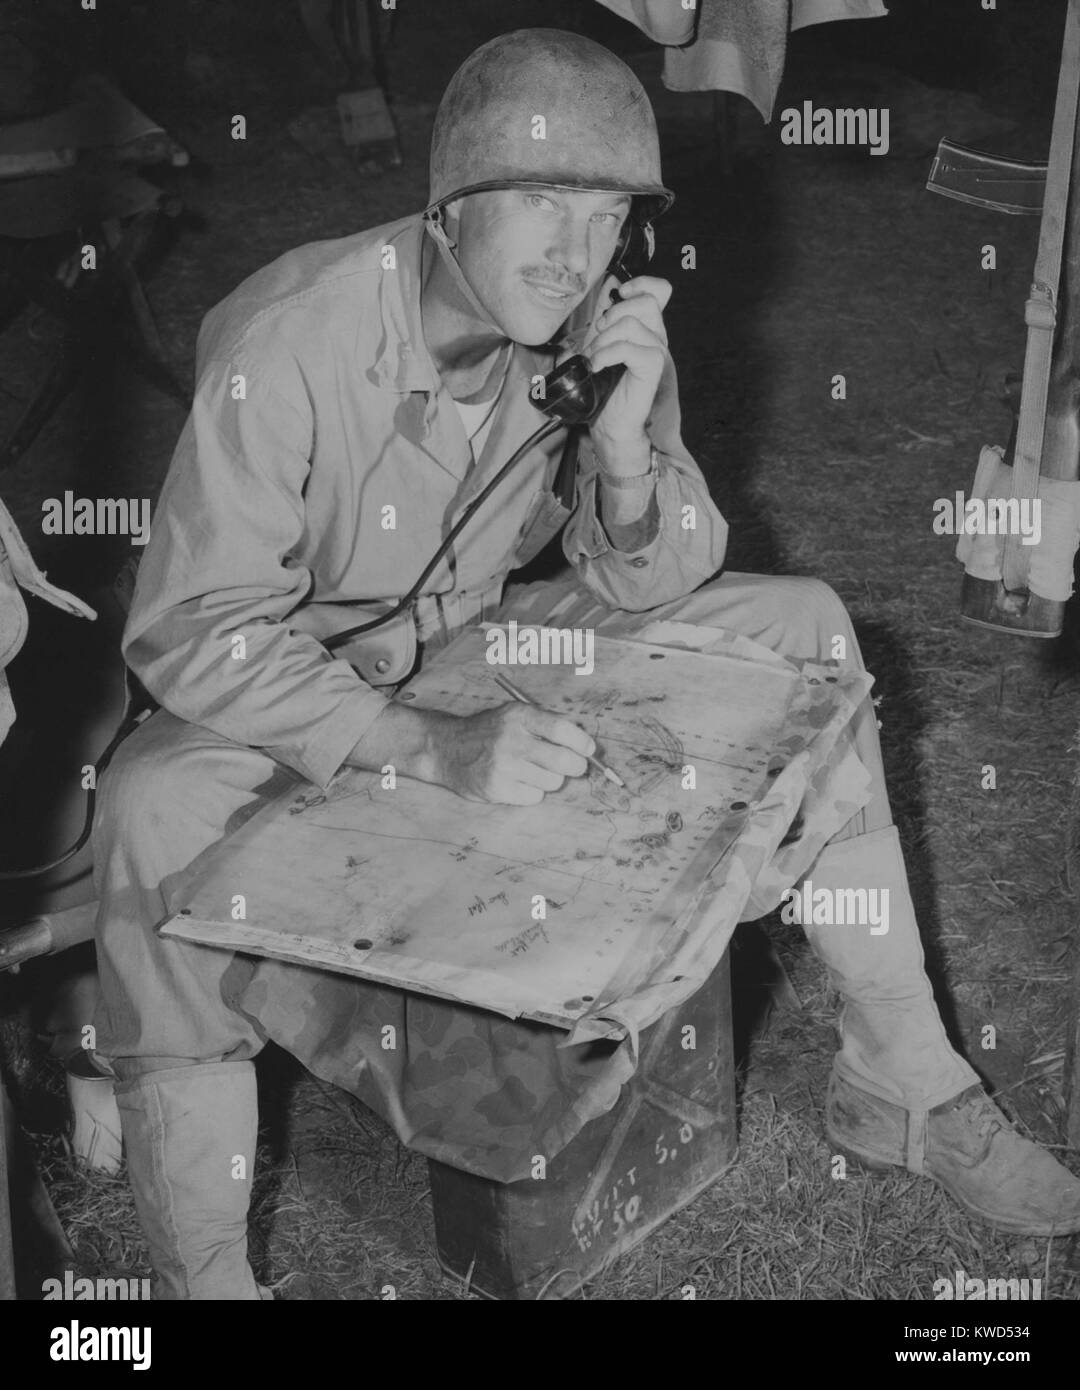 Lt. Col. Raymond Murray taking a message over field phone and plotting positions on a map, August 23, 1950. With his unit, he participated in the battles of the Naktong River perimeter, Wolmi-Inchon, Seoul, and Wonsan; and in the Marine advance north toward the Yalu River. Korean War, 1950-53. (BSLOC 2014 11 17) Stock Photo